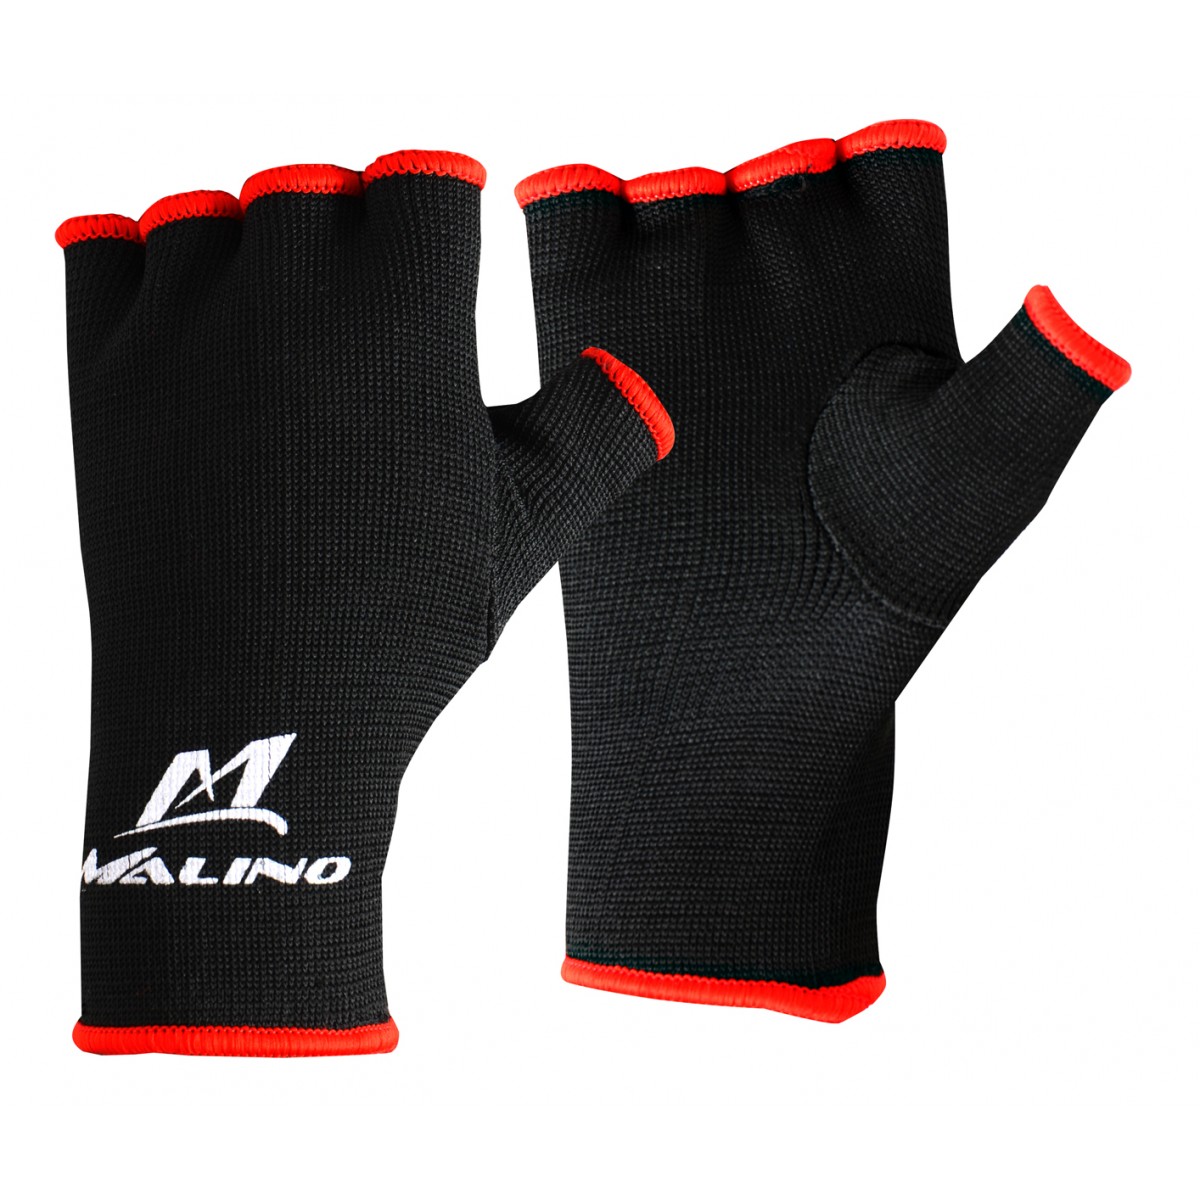 Malino Inner Hand Gloves with Thumbs Black-Red